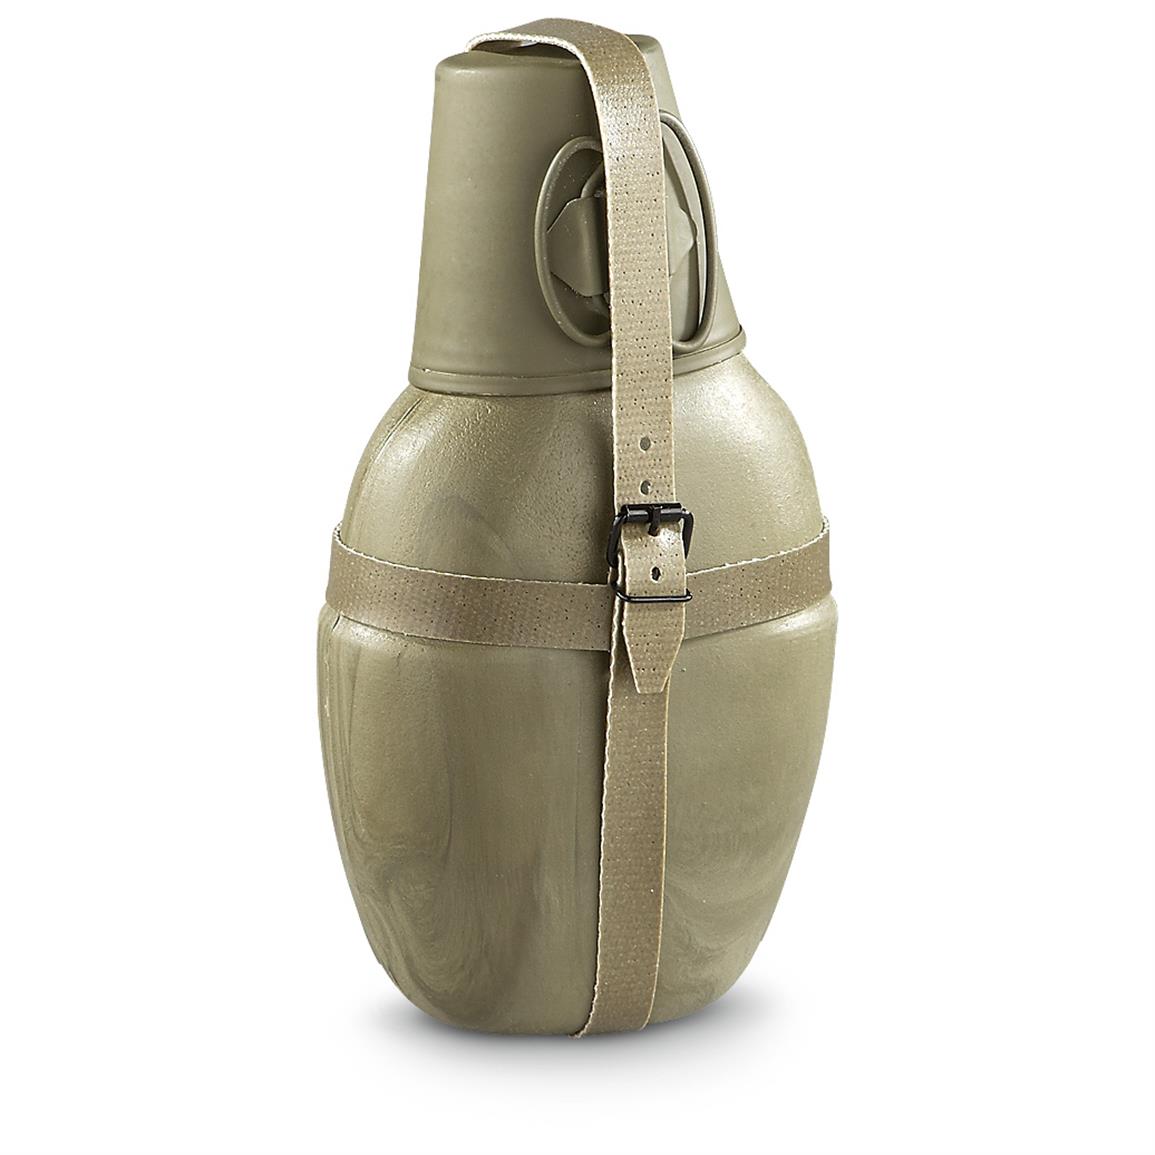 German Military Surplus Insulated Canteen, Like New